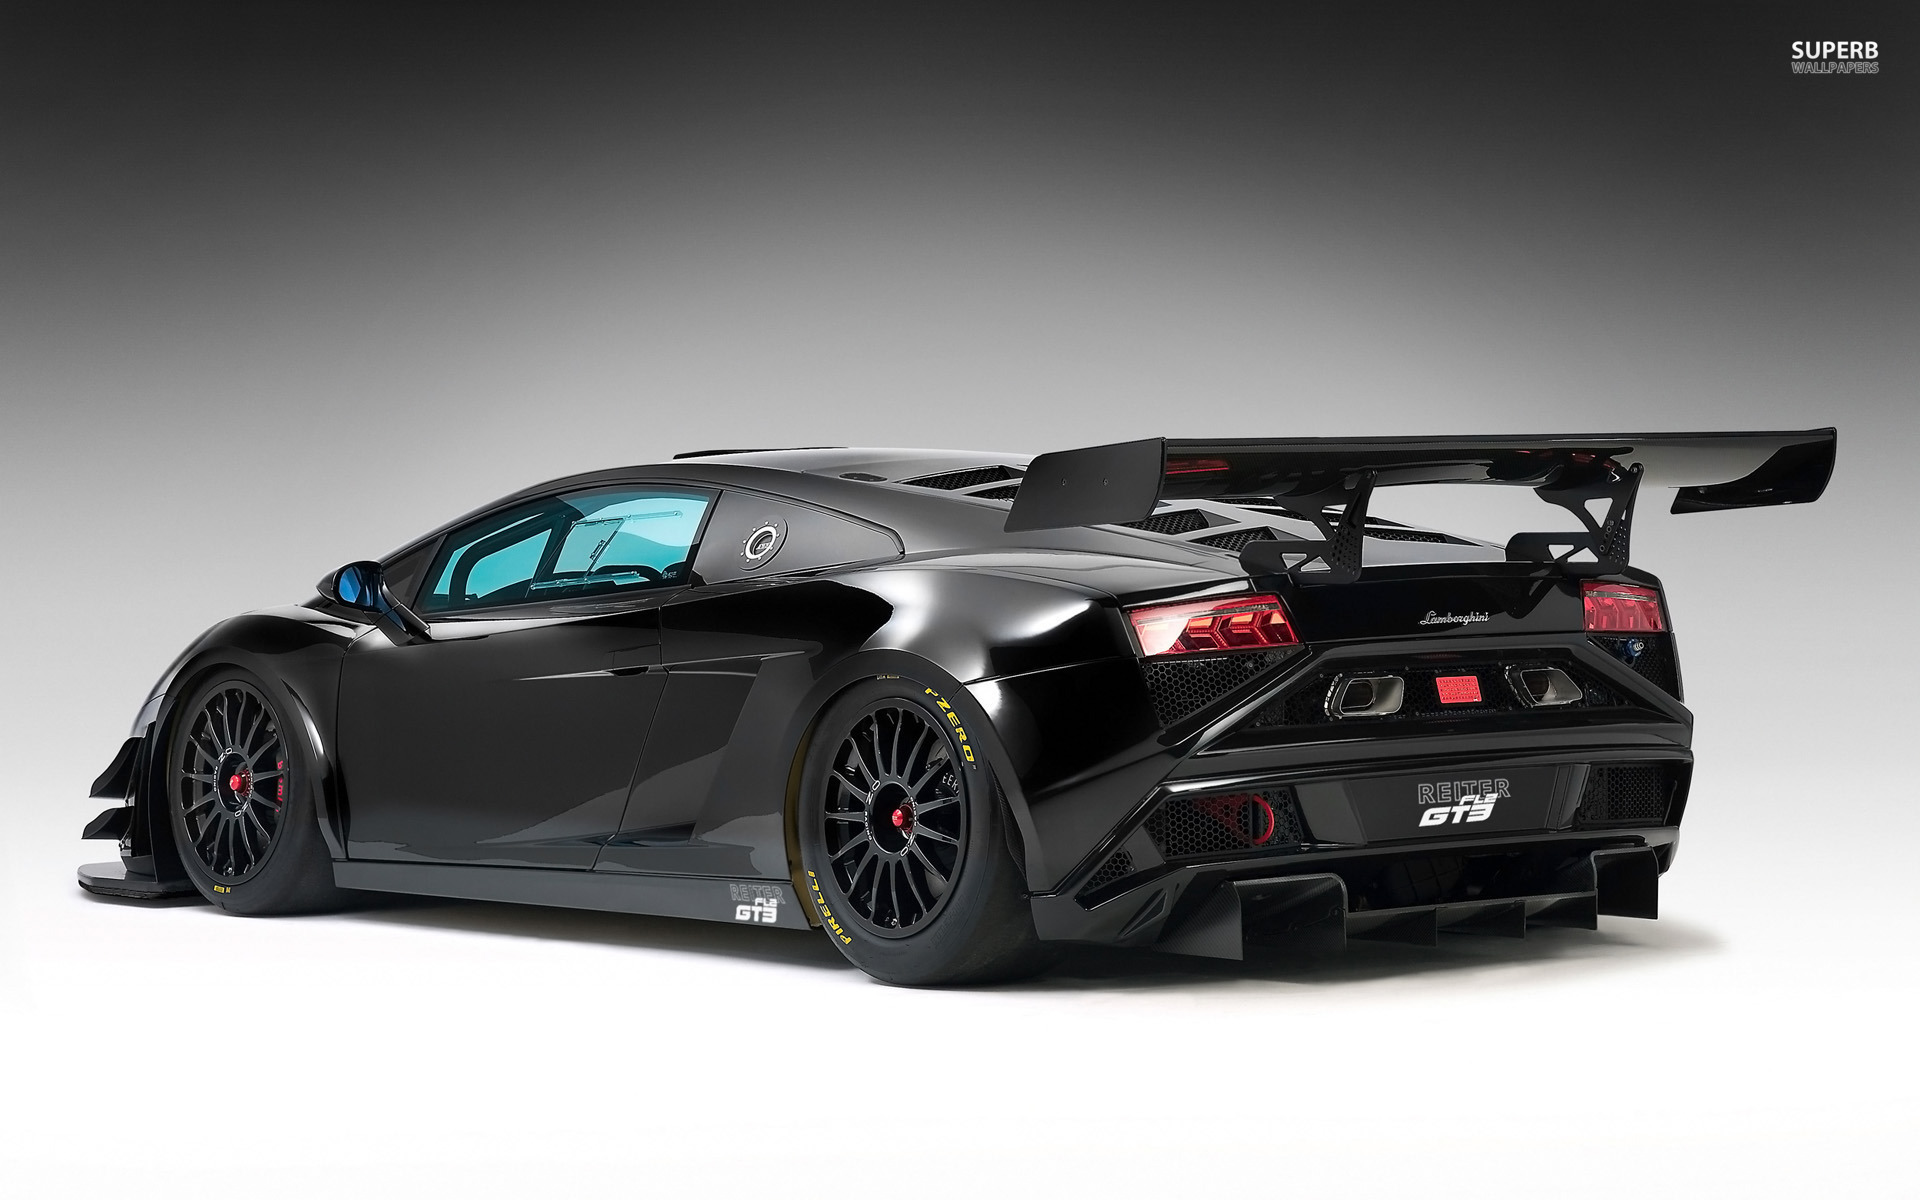 Reliable car Lamborghini Sesto Elemento wallpapers and images